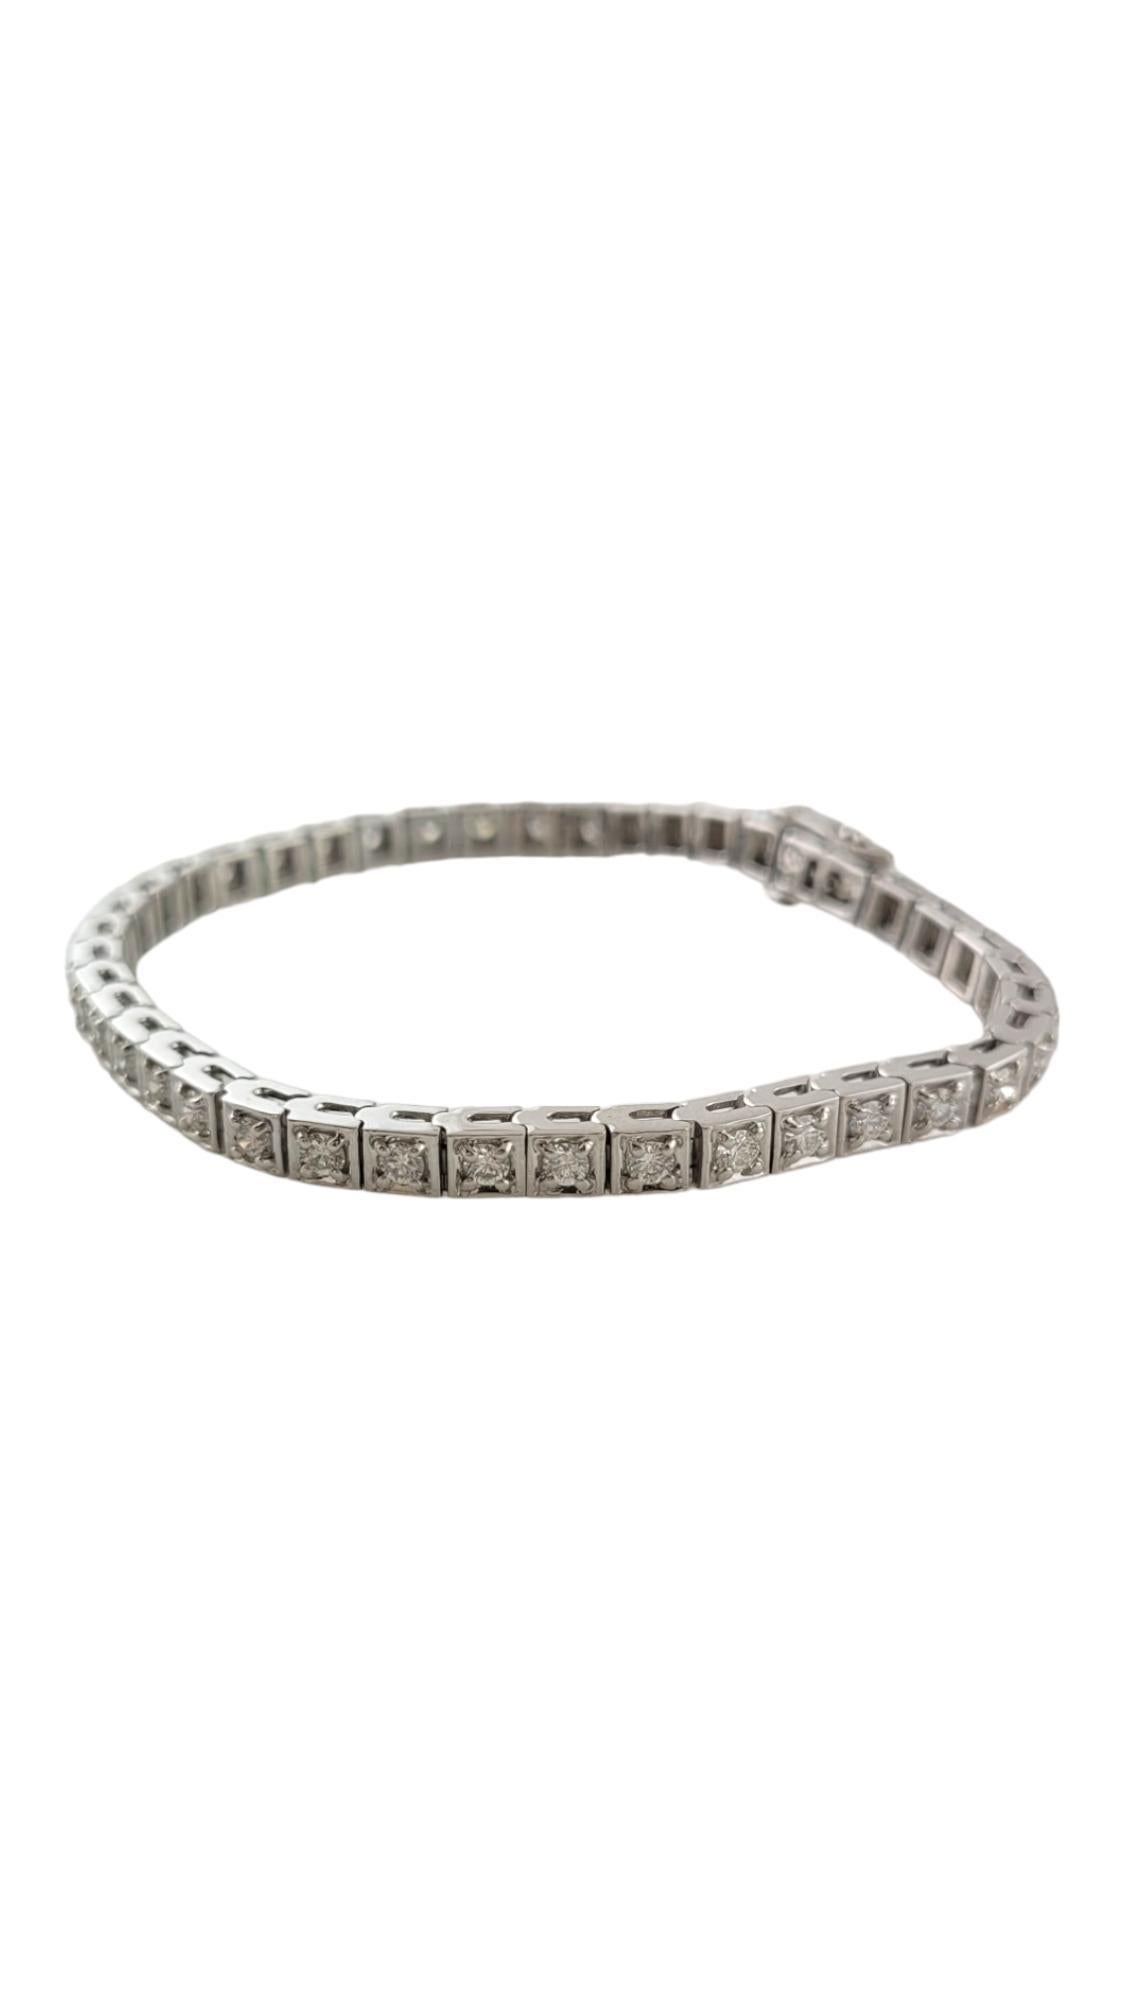 This sparkling bracelet features 41 round brilliant cut diamonds set in classic 14K white gold.  Width:  4 mm.

Approximate total diamond weight:  2.50 ct.

Diamond clarity: VS2

Diamond color: I

Size: 6.5 inches

Weight:  11.3 dwt. /  17.6